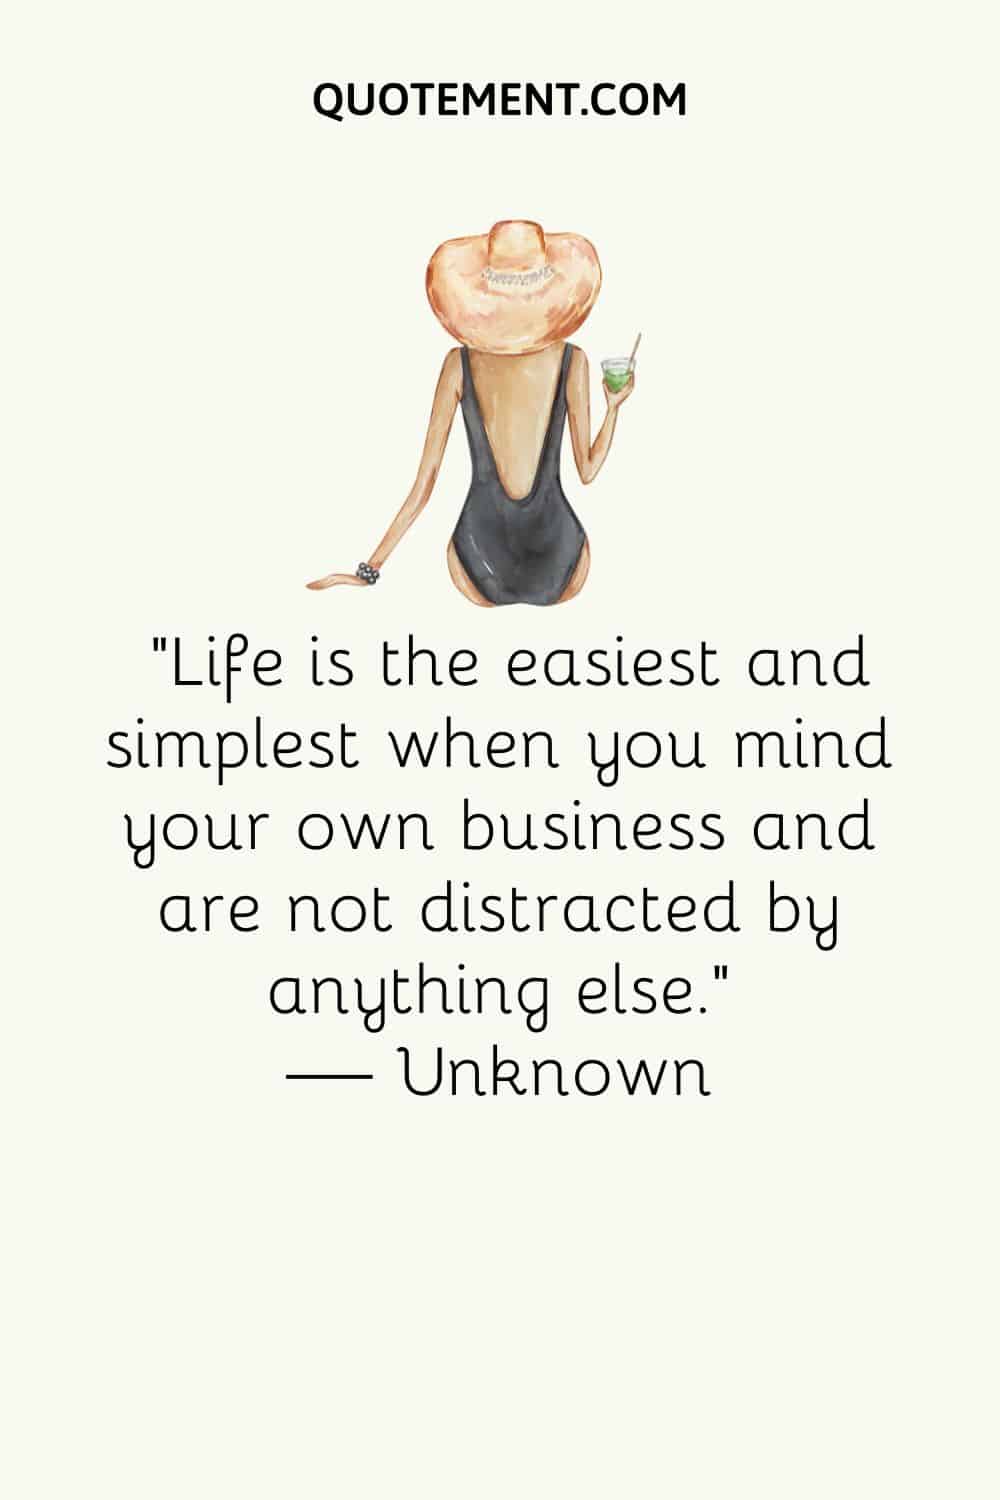 Life is the easiest and simplest when you mind your own business and are not distracted by anything else